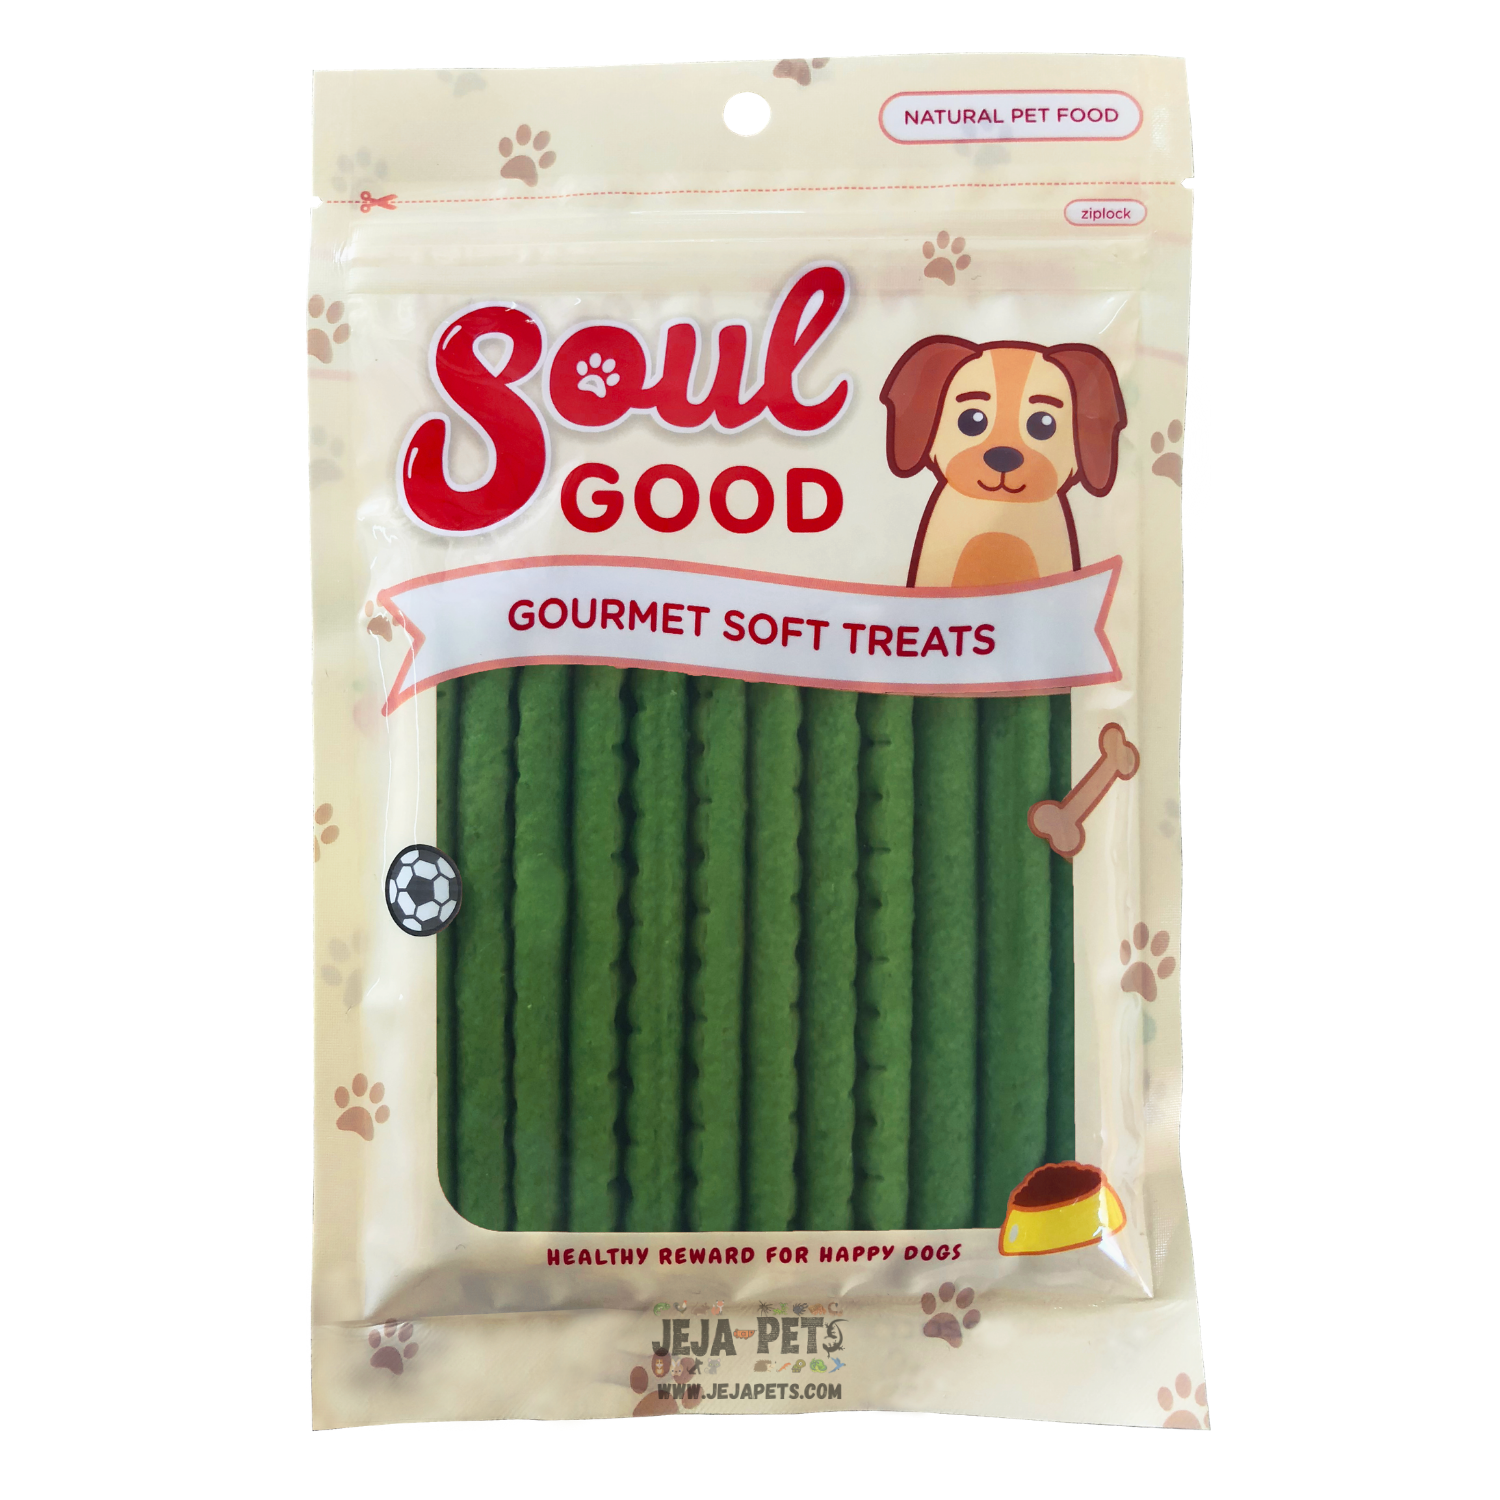 [DISCONTINUED] Soul Good Gourmet Soft Treats (Vegetable) - 100g